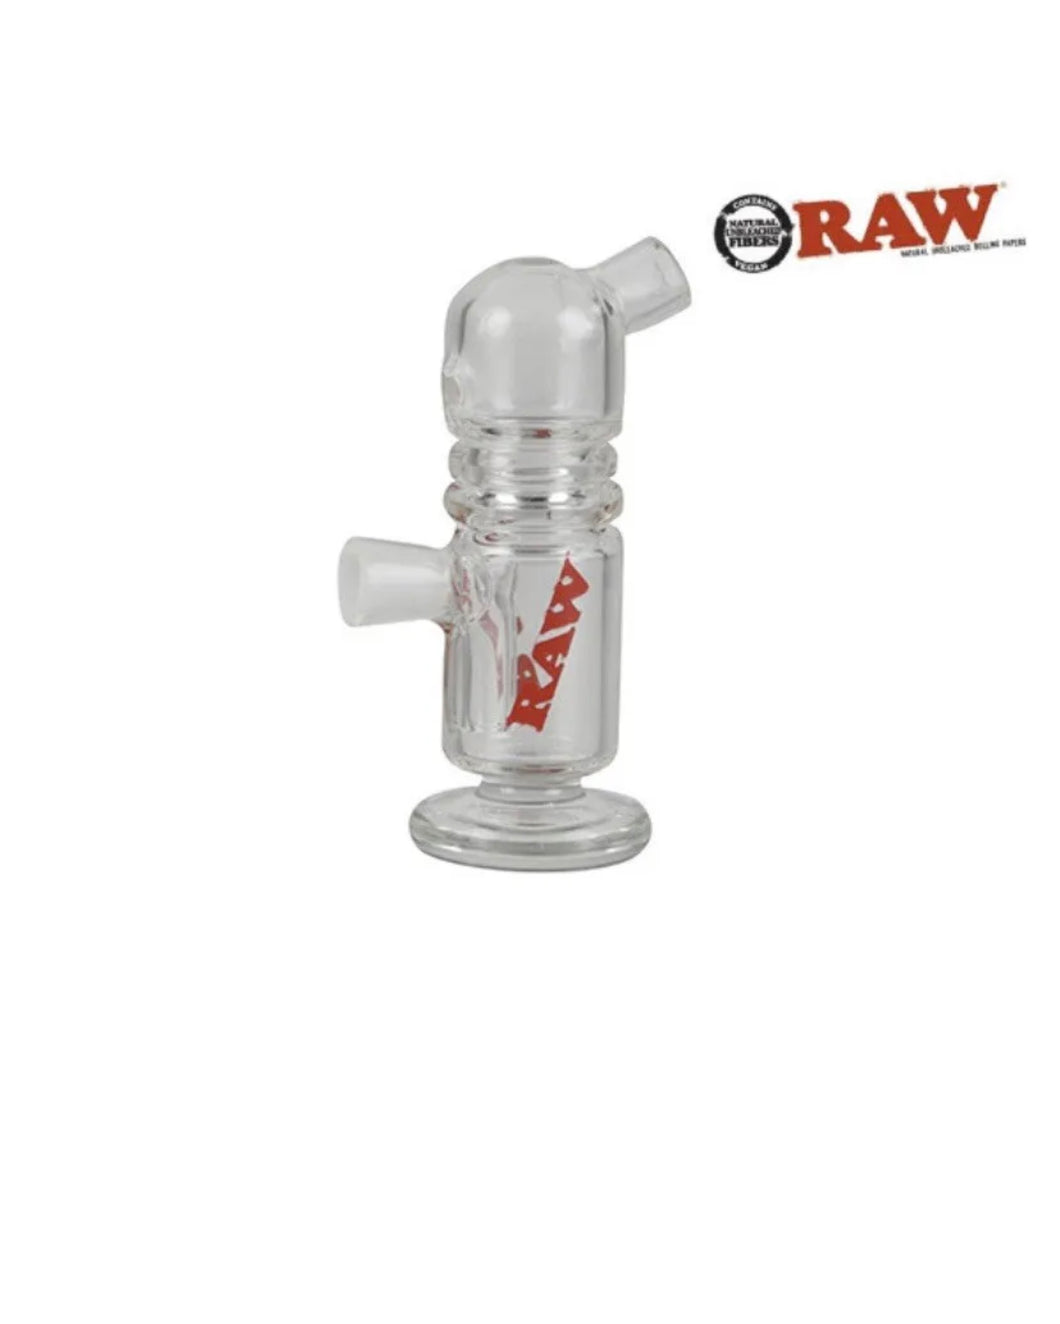 RAW x RooR Cone Bubbler.  made in USA. 100% AUTHENTIC